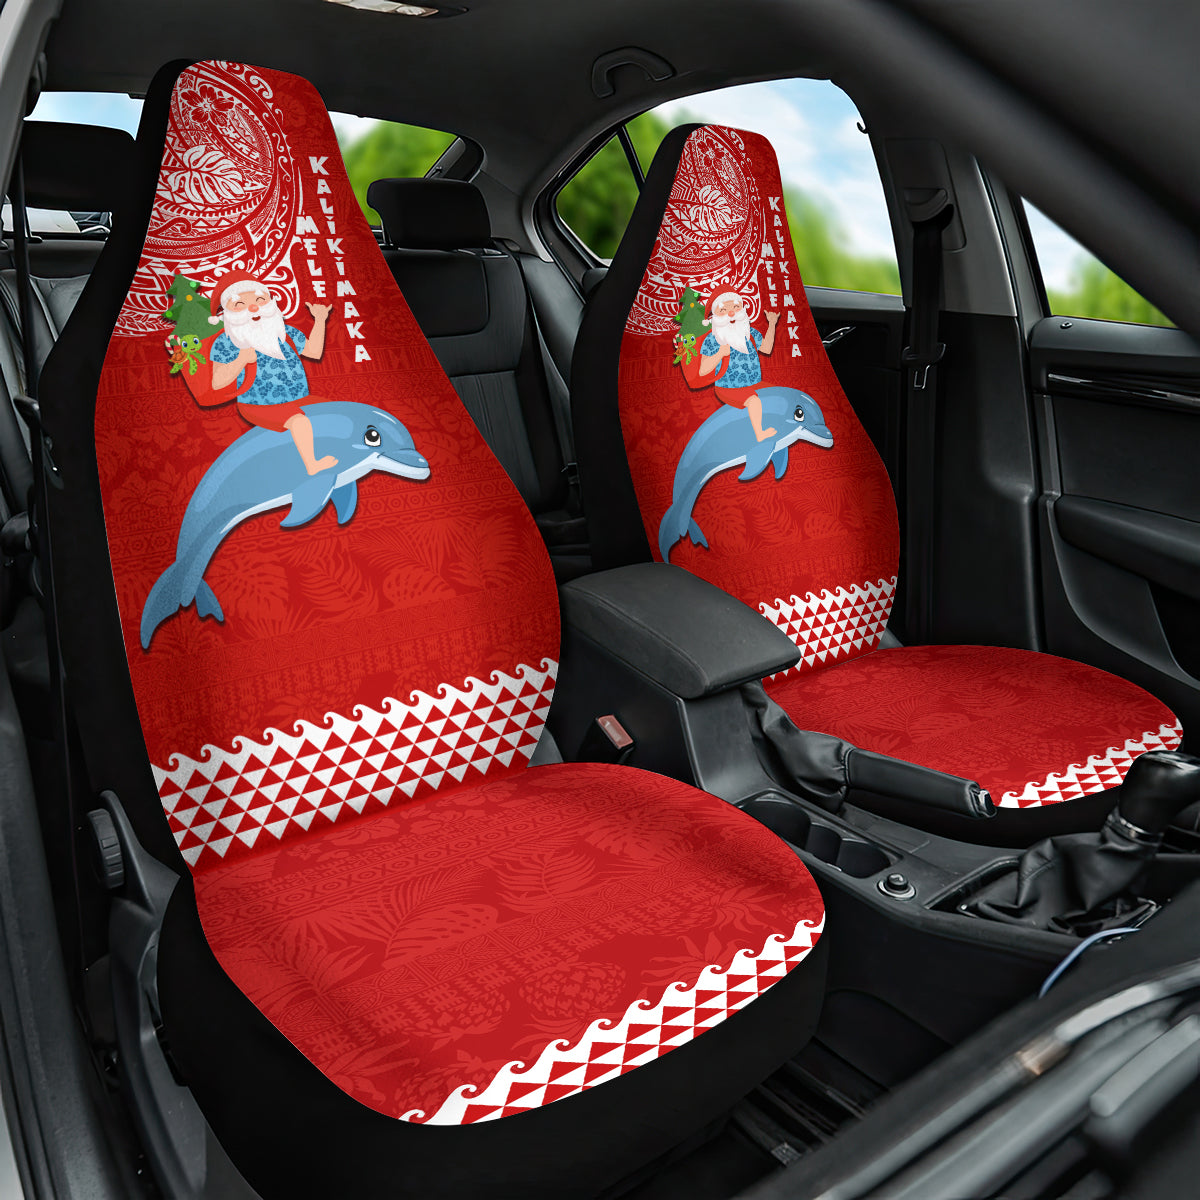 Hawaii Mele Kalikimaka Car Seat Cover Santa Riding The DolPhin Mix Kakau Pattern Red Style LT03 One Size Red - Polynesian Pride